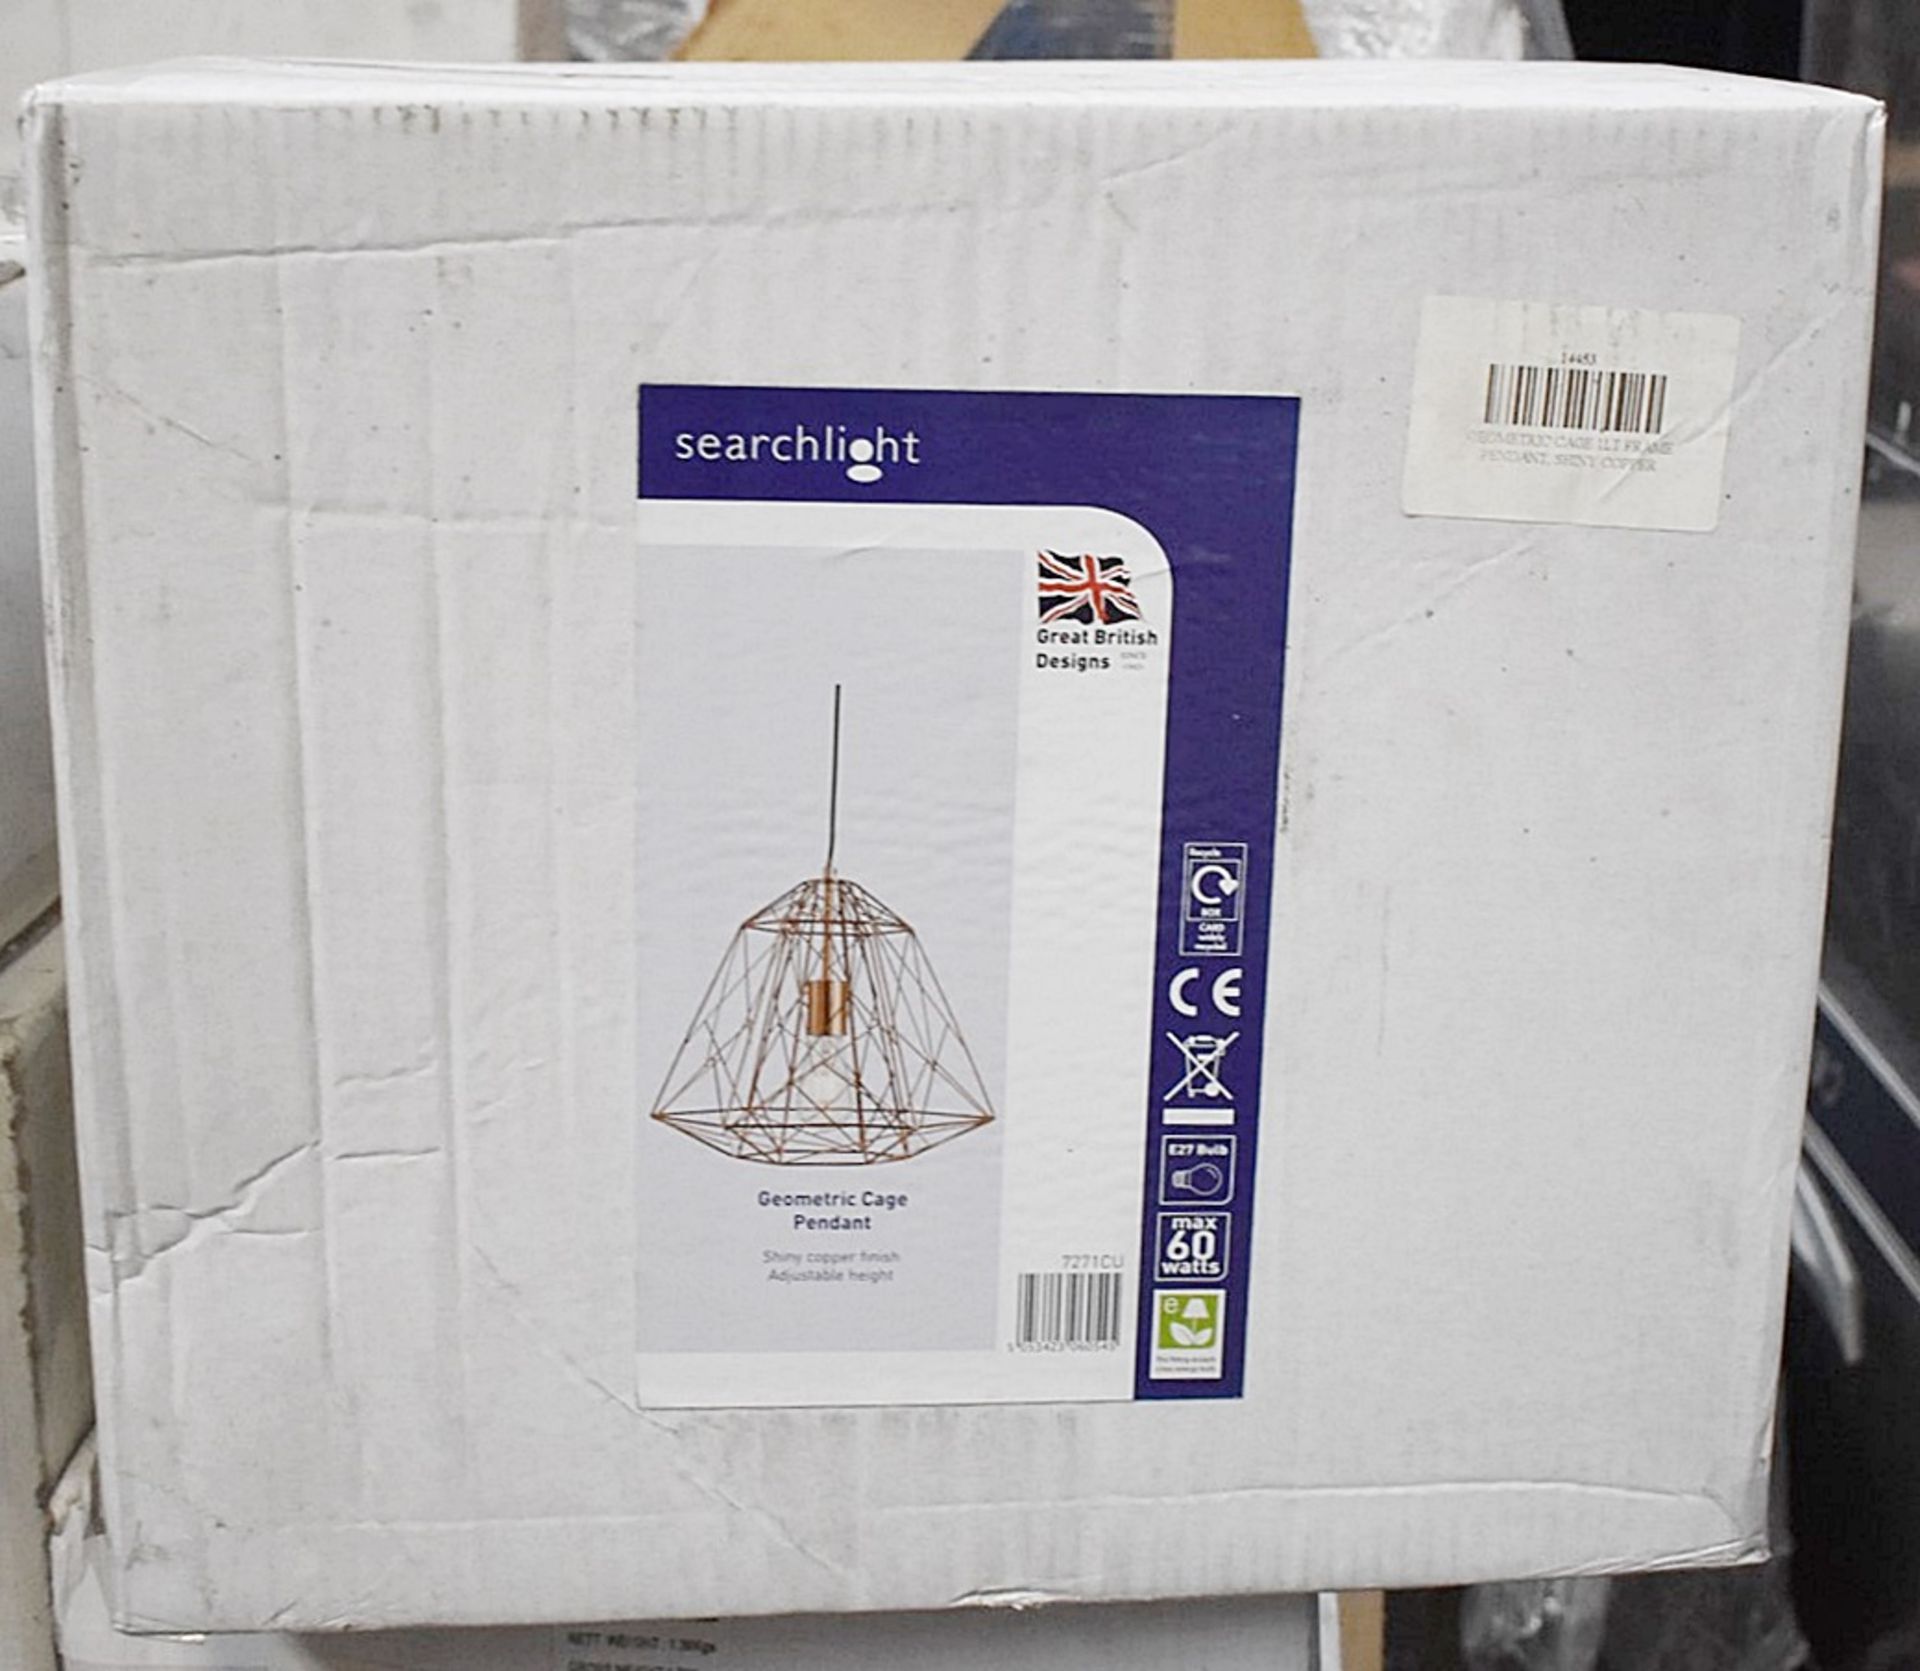 1 x Copper Geometric Cage Frame Pendant Light - New Boxed Stock - CL323 - Ref: 7271CU / PalH - Image 2 of 3